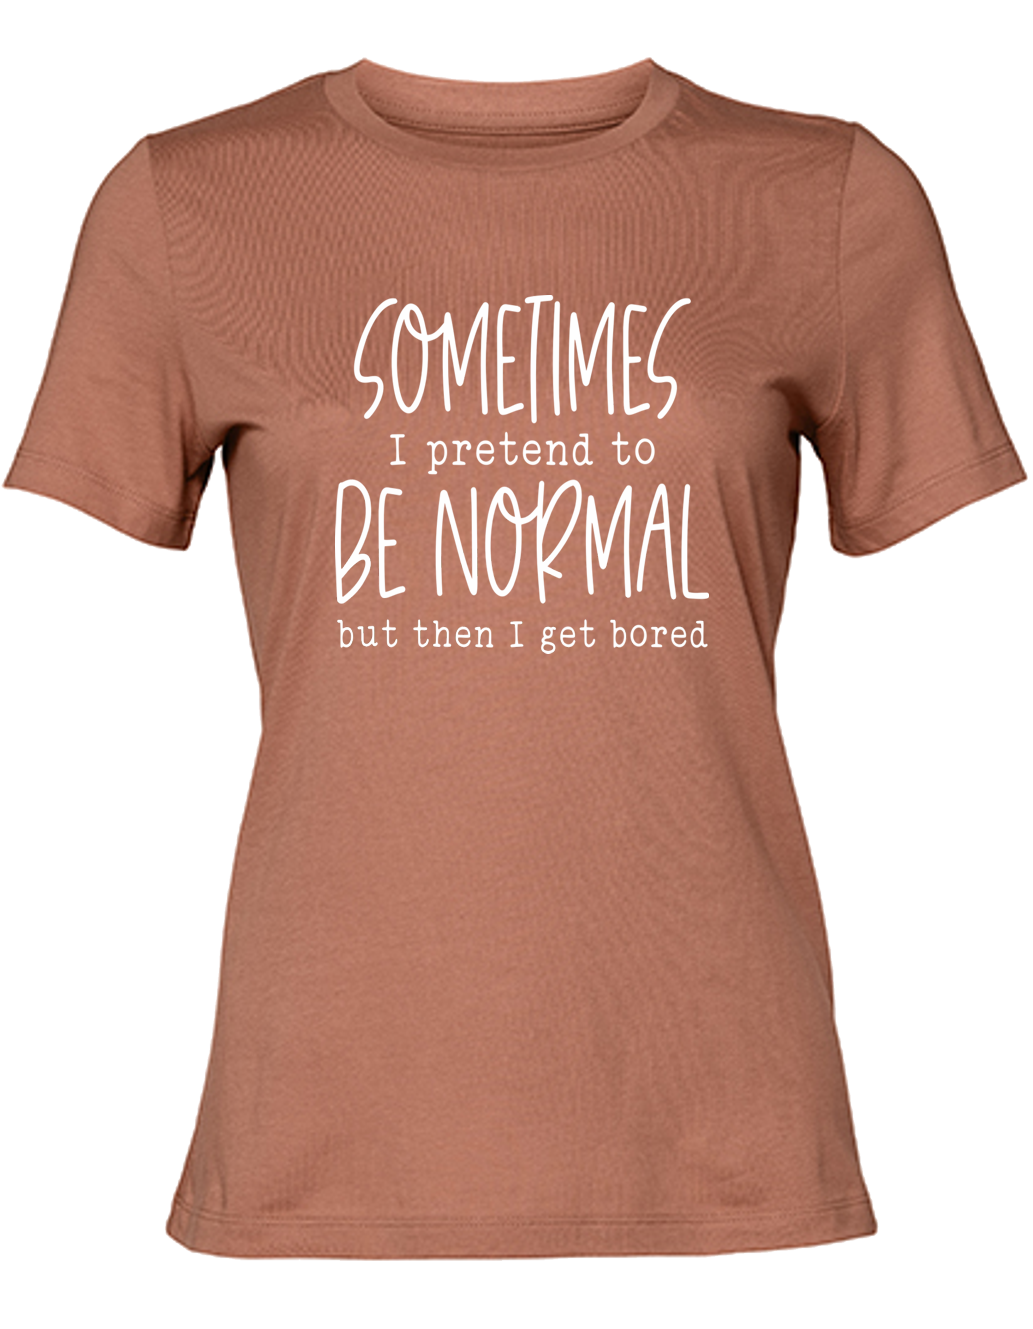 I pretend to be normal